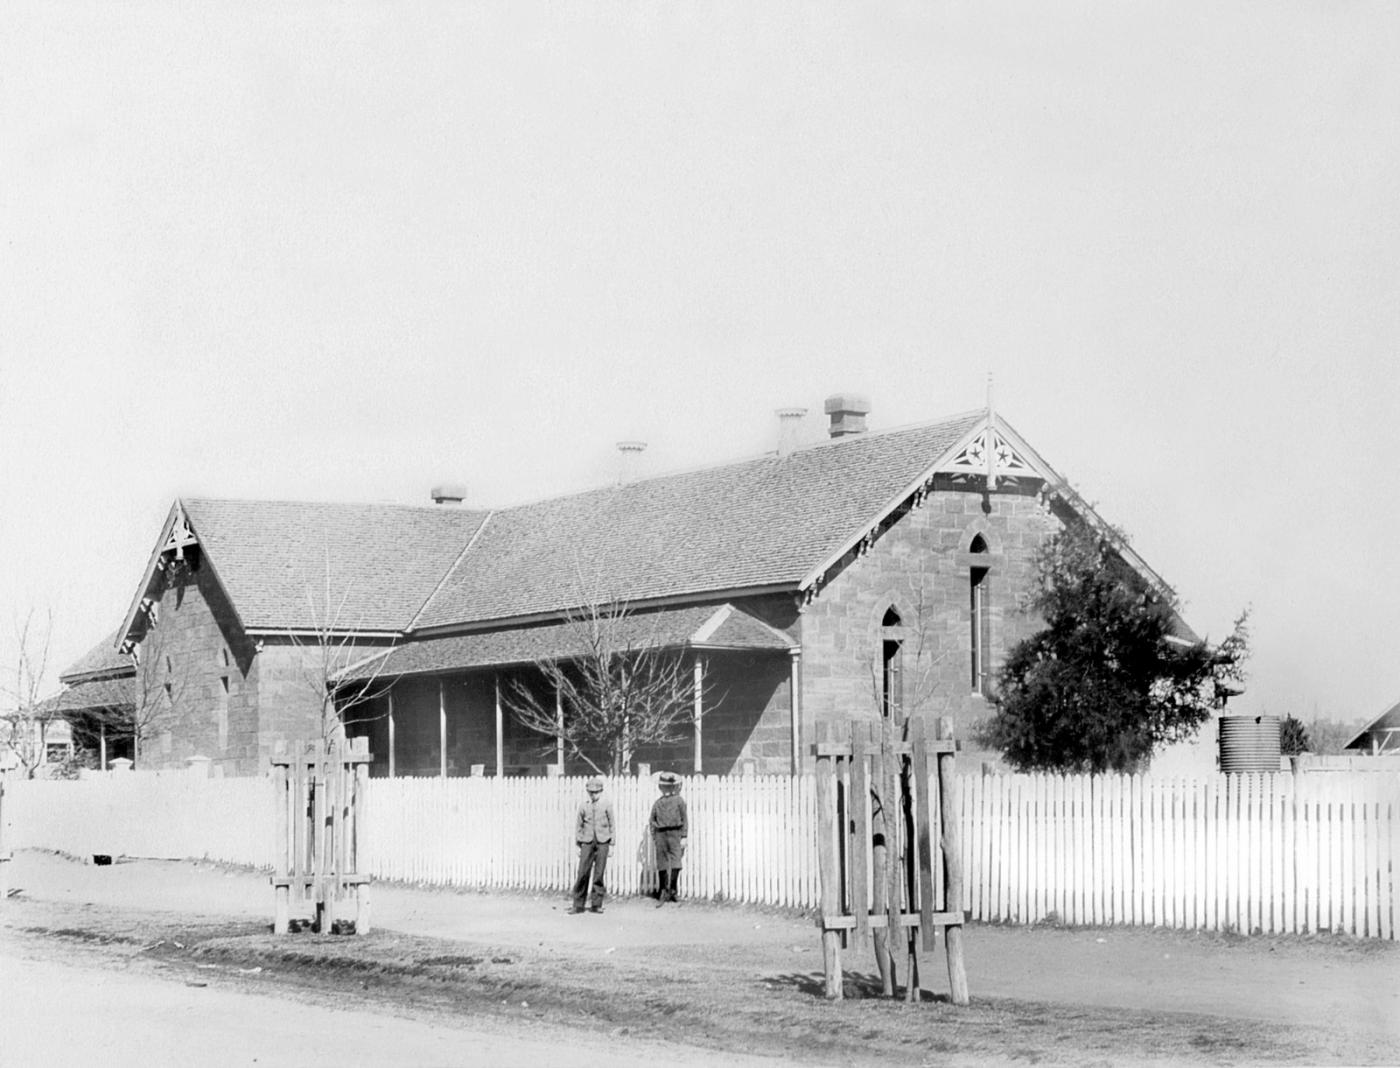 Exterior of Warwick public school, a single building with a few people gathered out the front